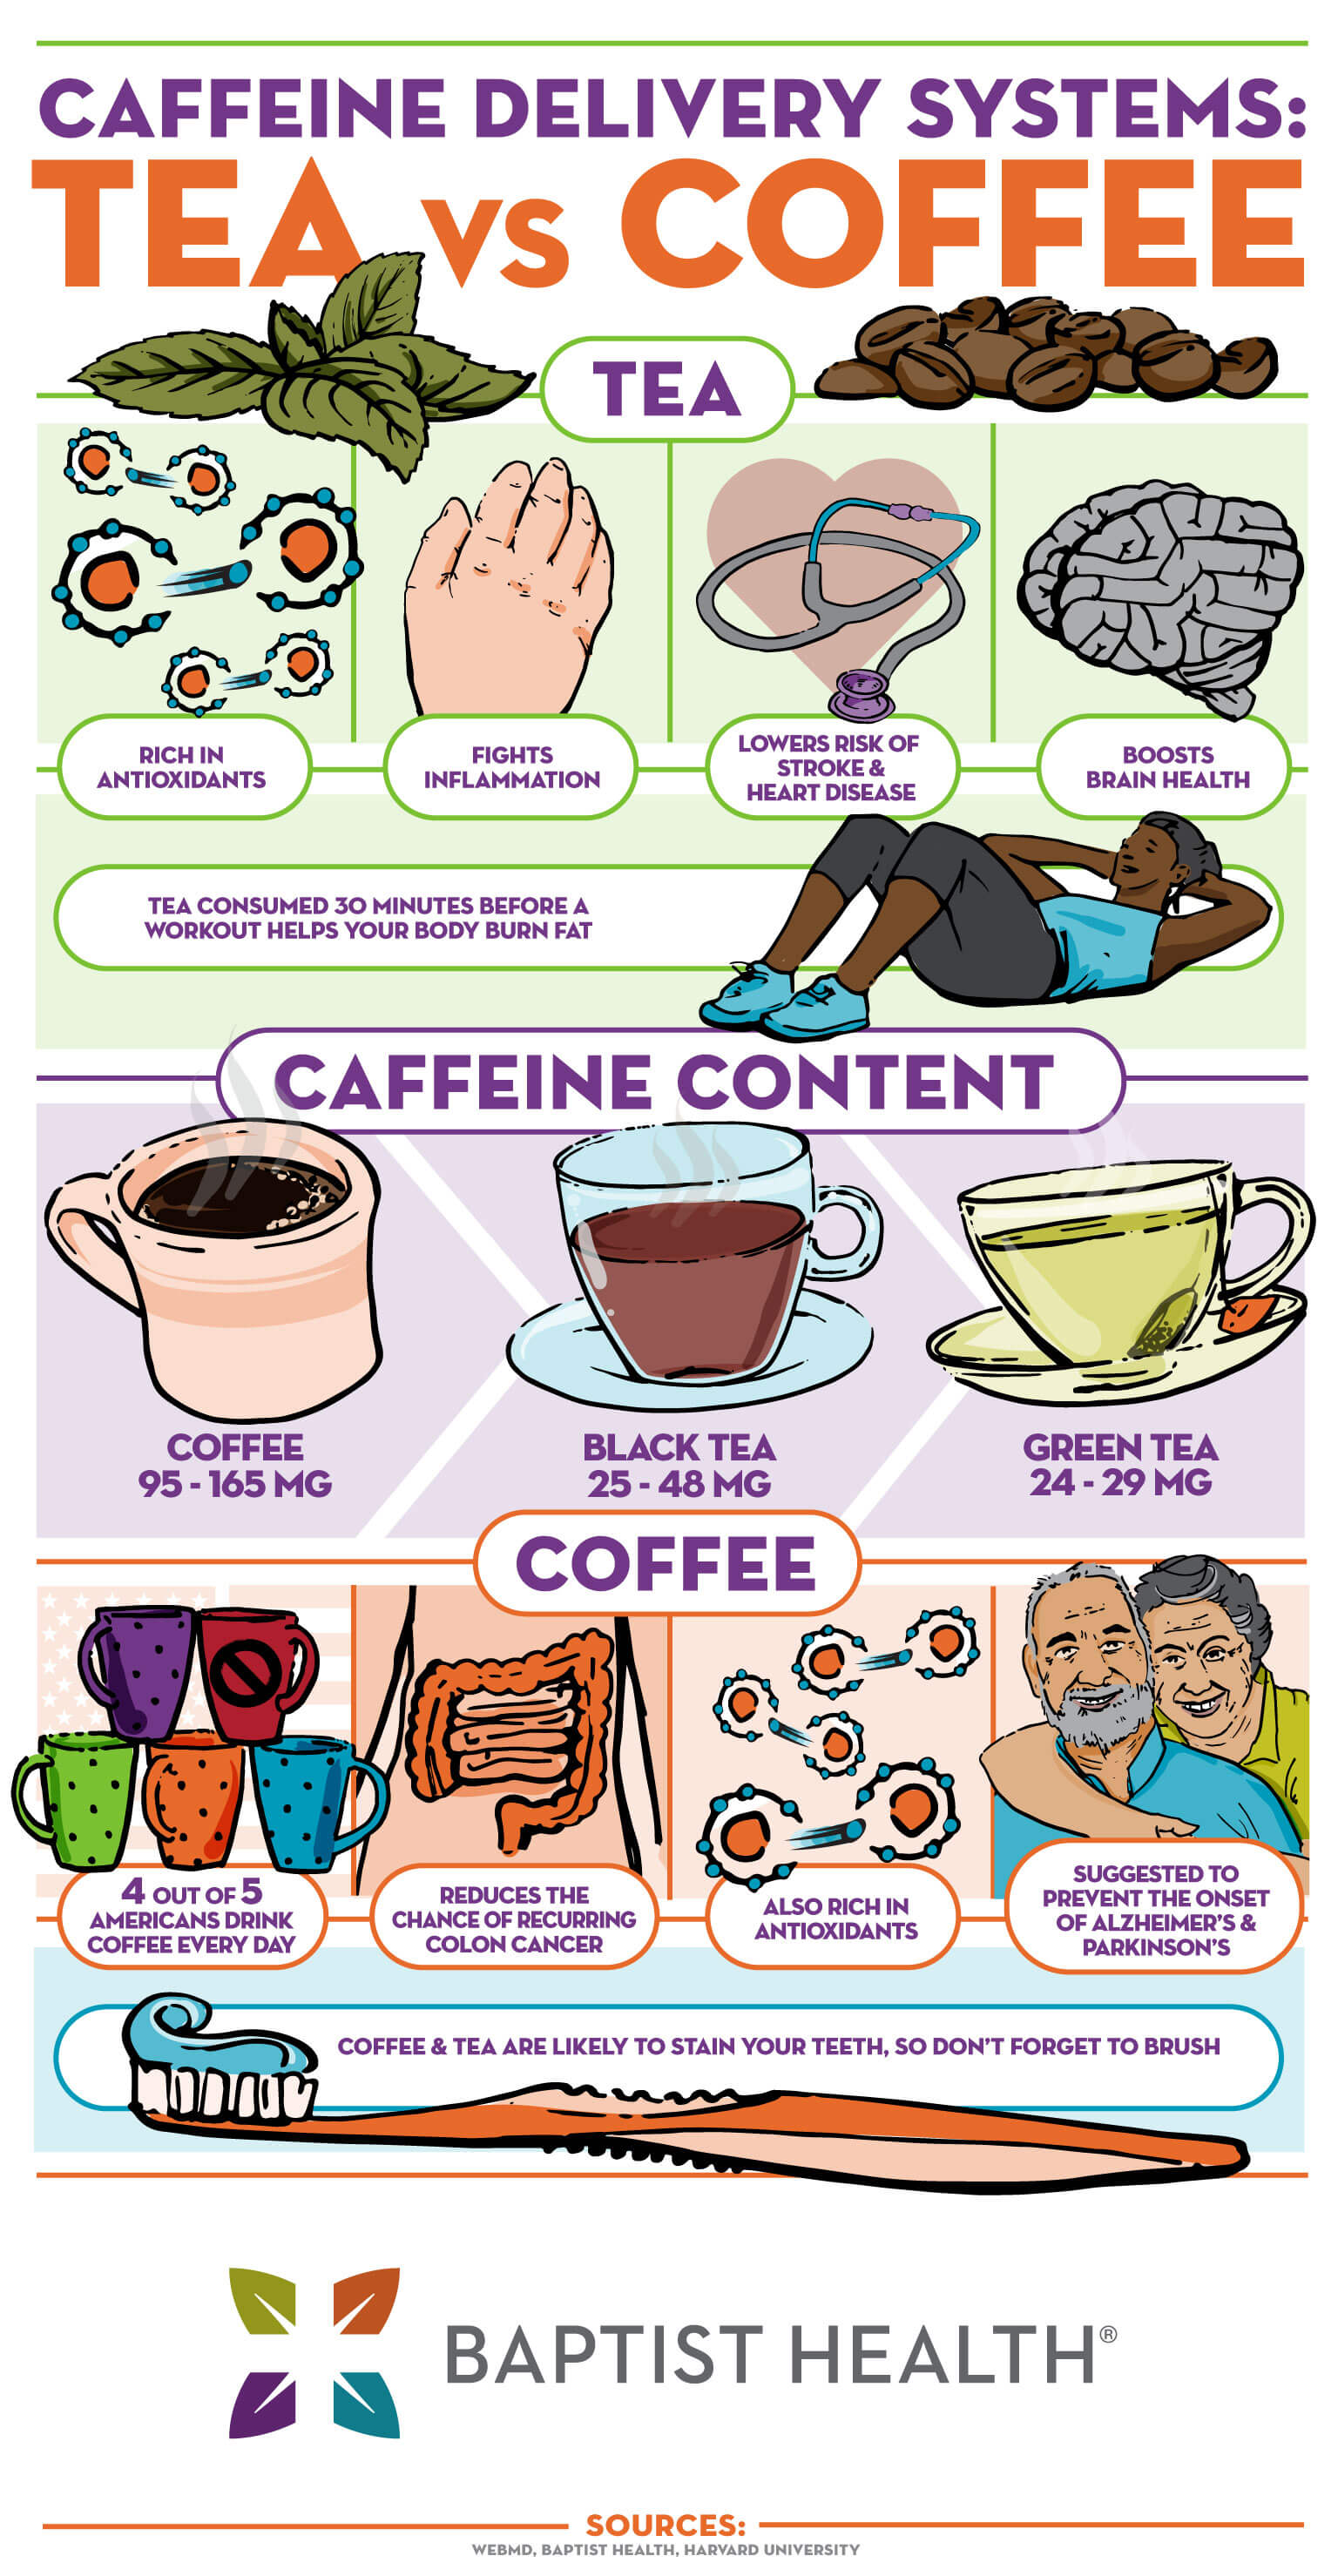 https://www.baptisthealth.com/-/media/images/migrated/blog-images/content-images/2018-coffeevstea-infographic-1.jpg?rev=3fe7d6da801e414e81fe28c643c28897&hash=B0F48B3194394ABAB6743BDF2B2F0963